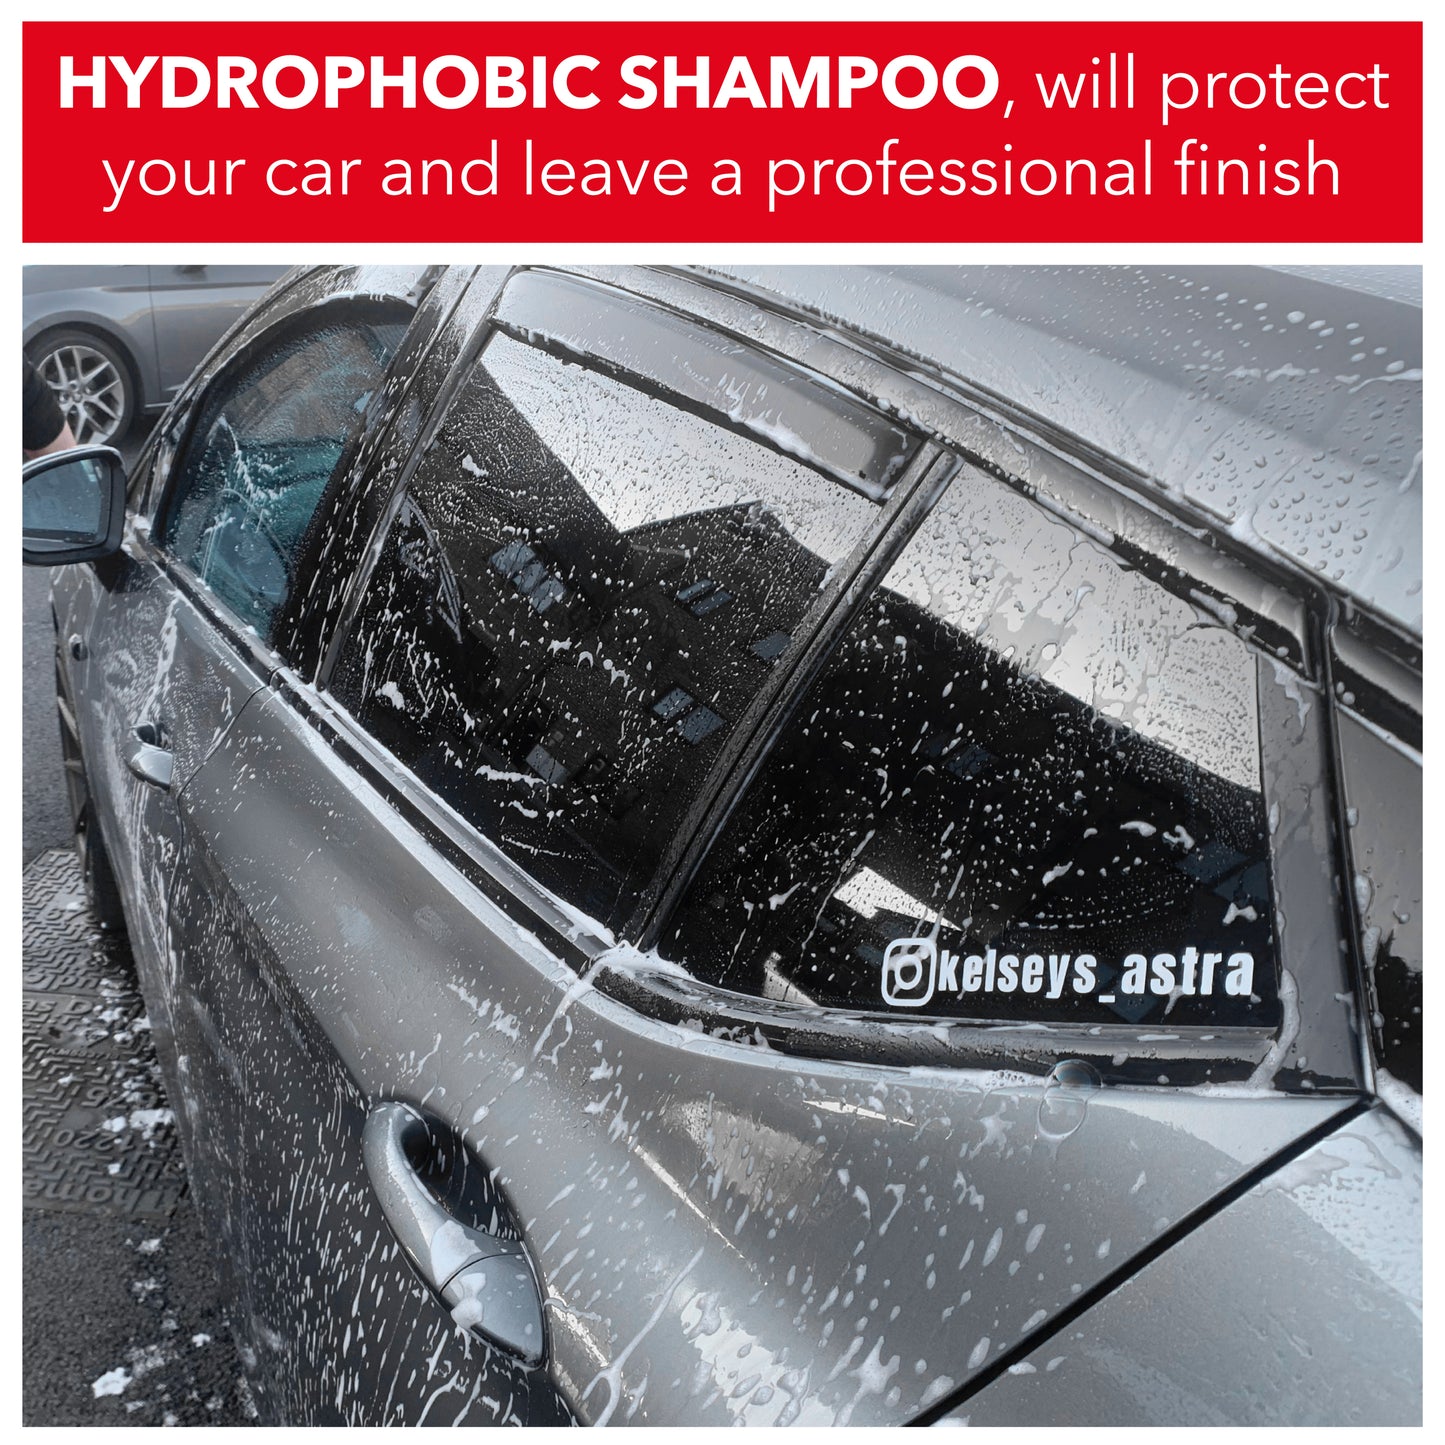 hydrophobic shampoo will protect your car and leave a professional finish